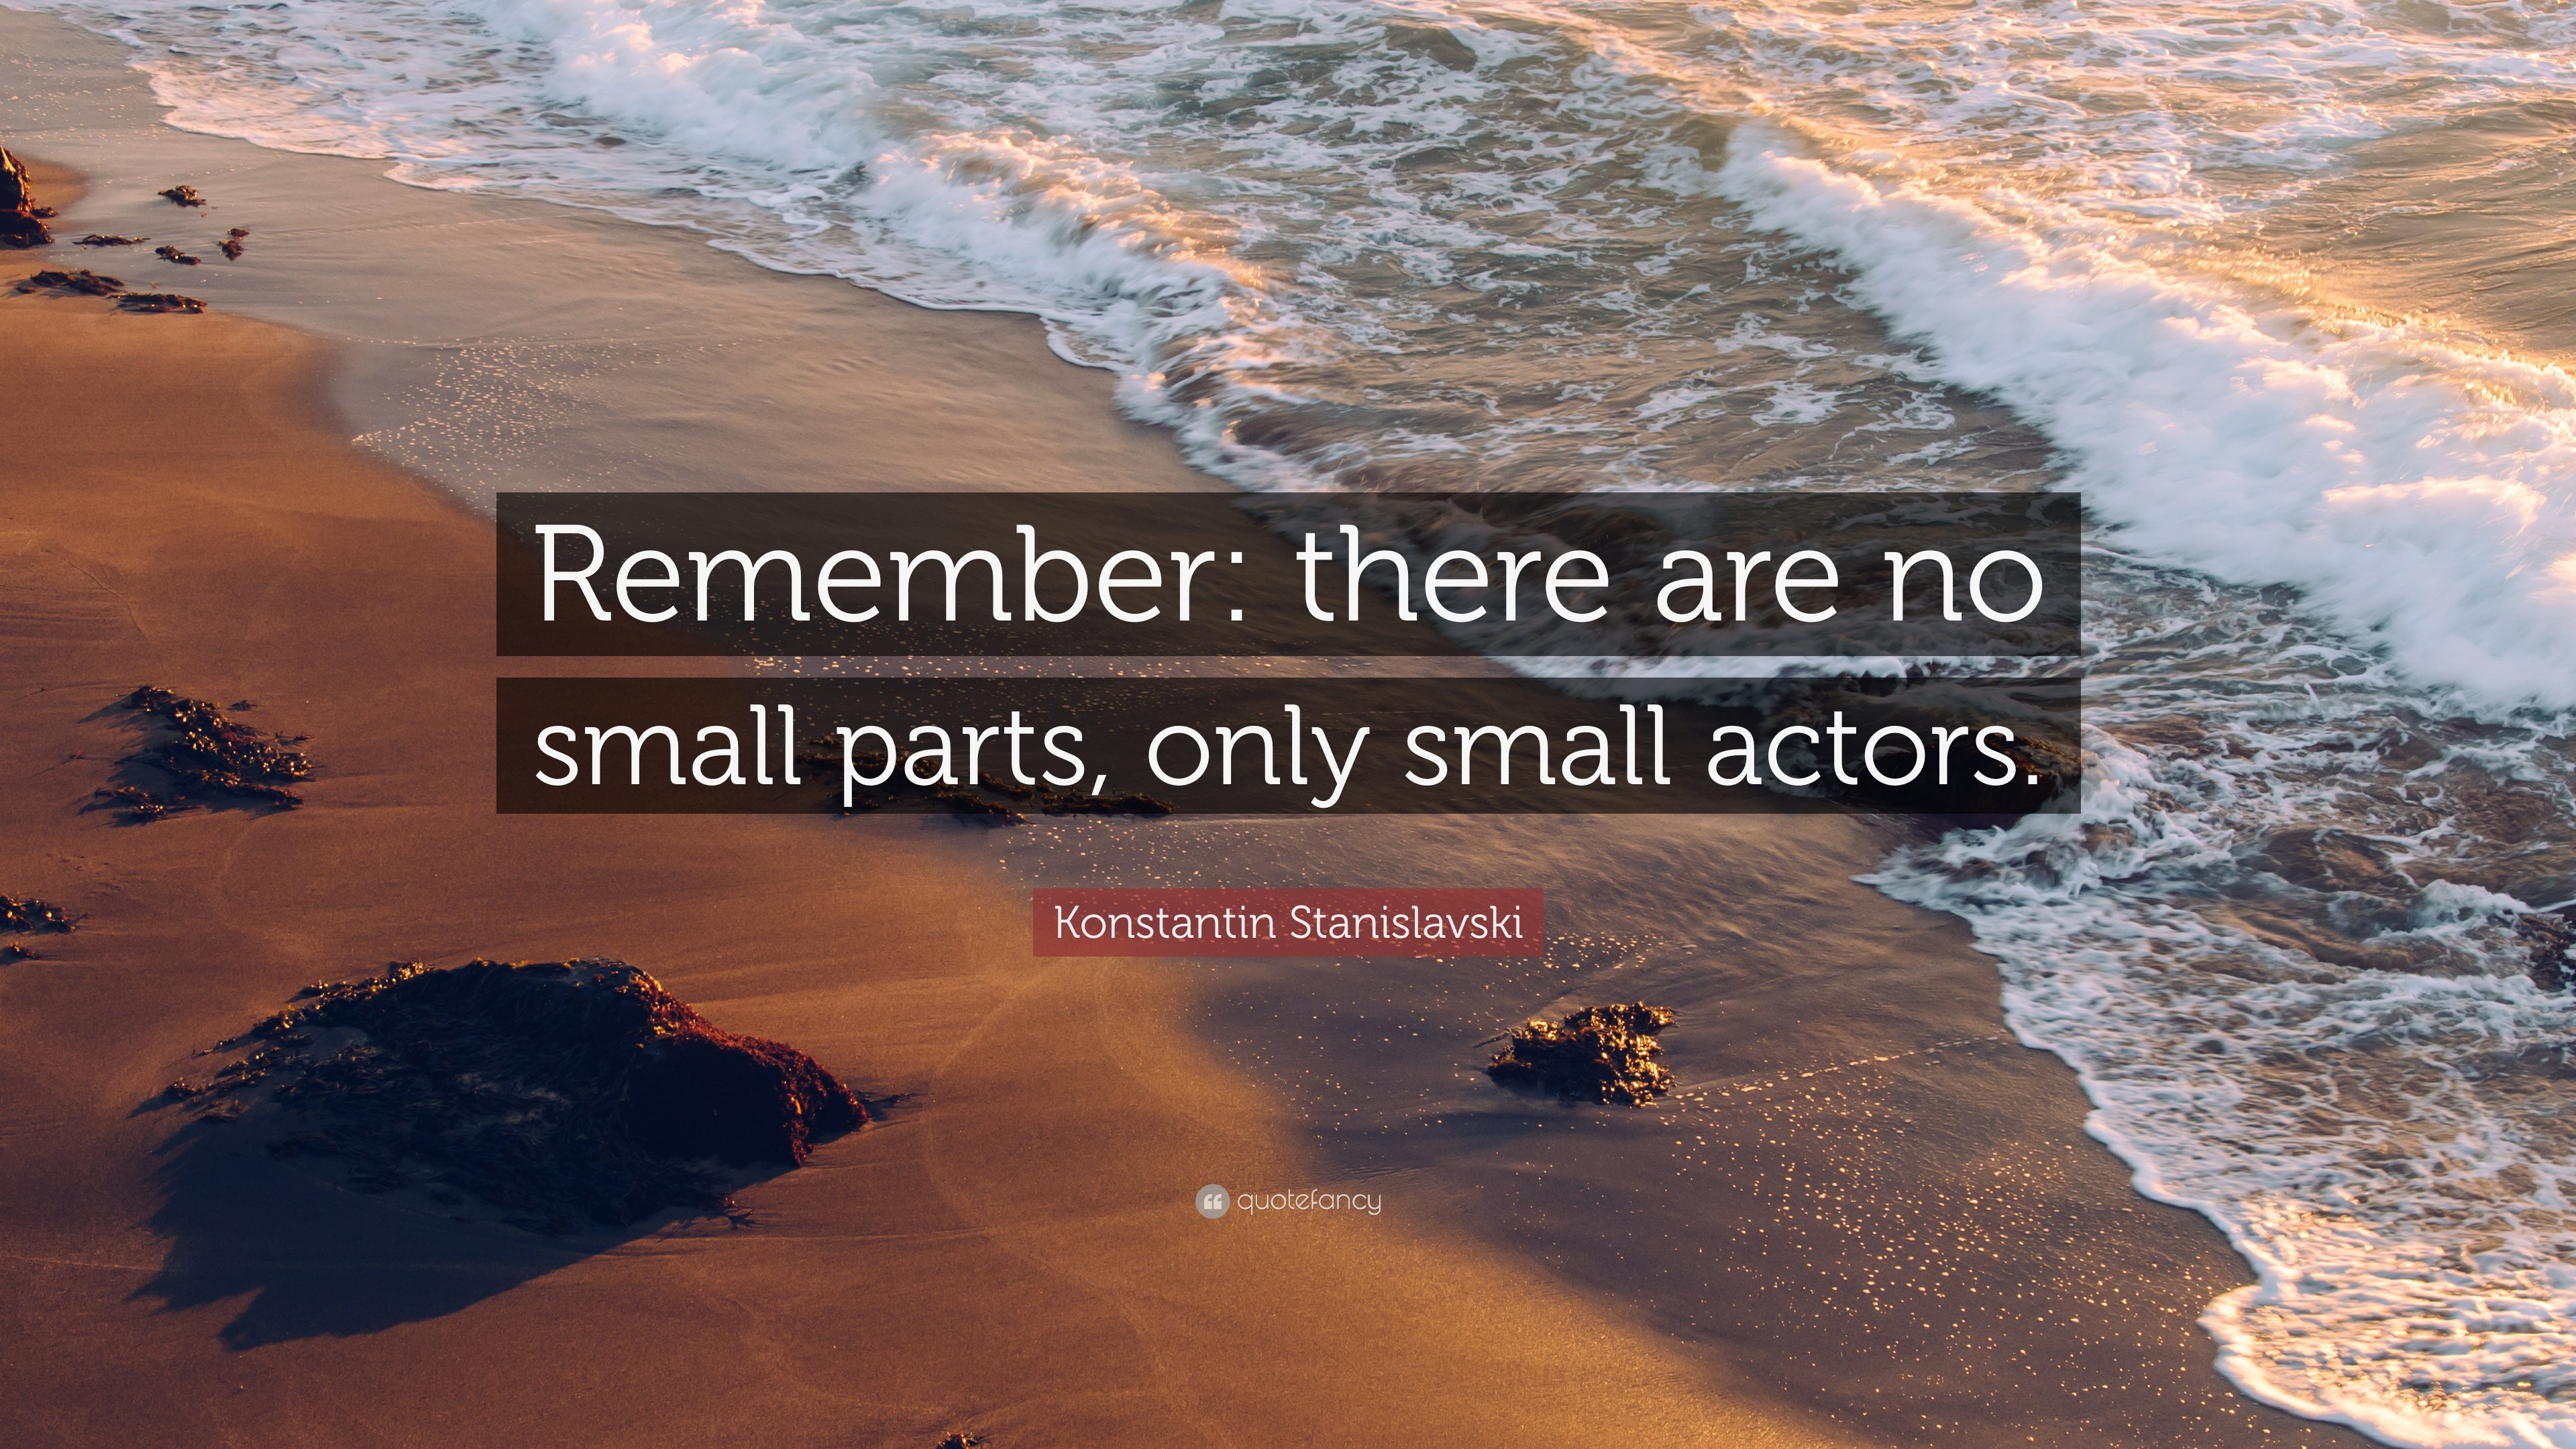 Konstantin Stanislavski Quote “remember There Are No Small Parts Only Small Actors” 